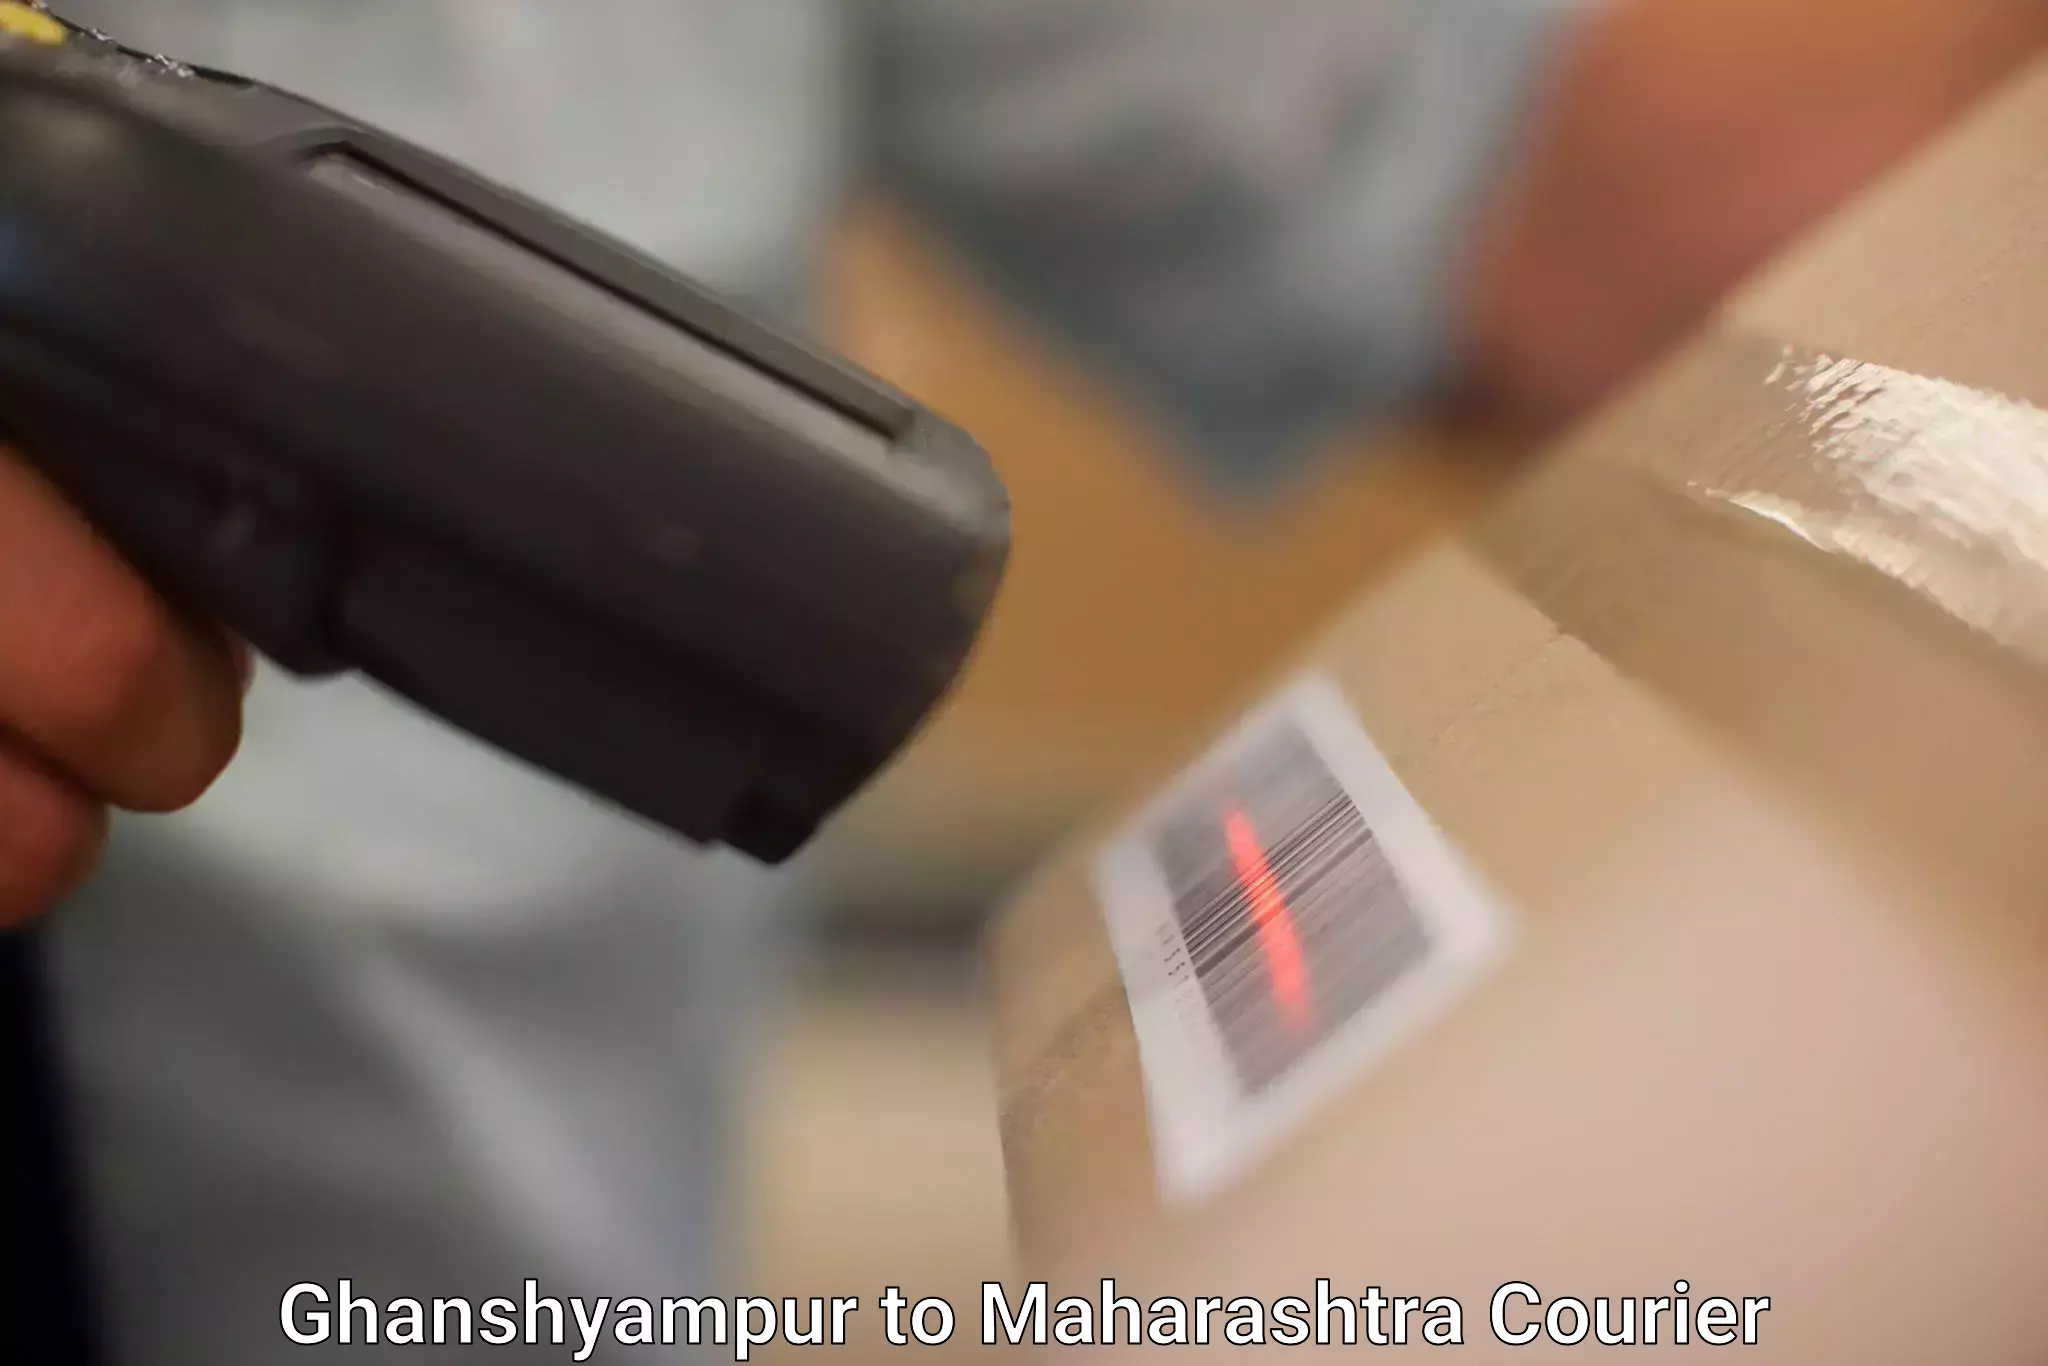 Easy access courier services Ghanshyampur to Maharashtra